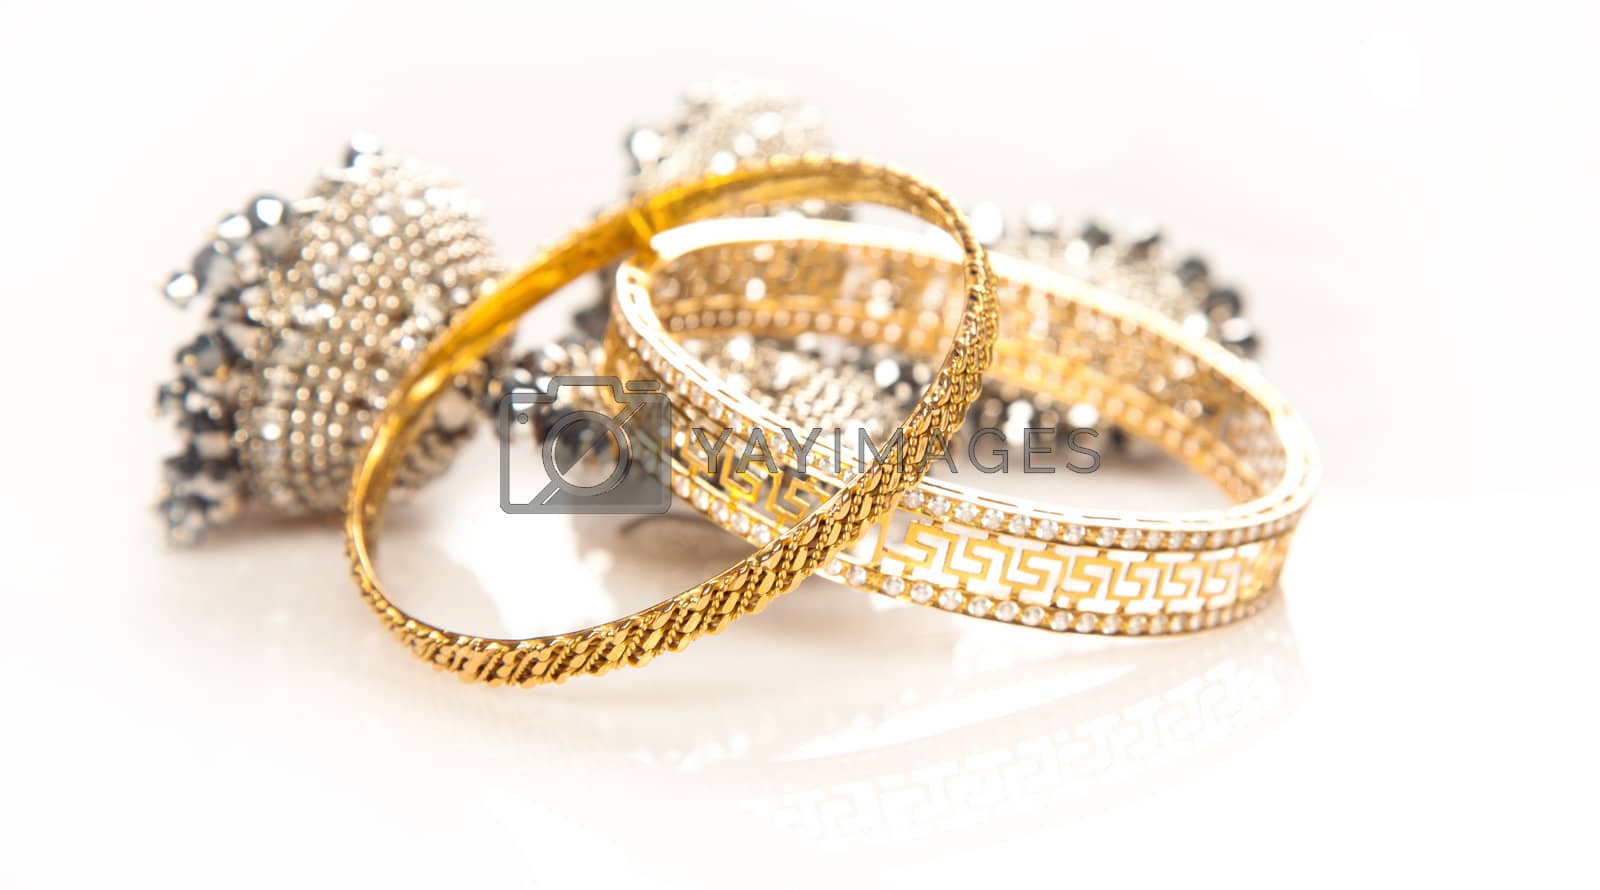 Royalty free image of Gold and Silver Jewelry by haiderazim